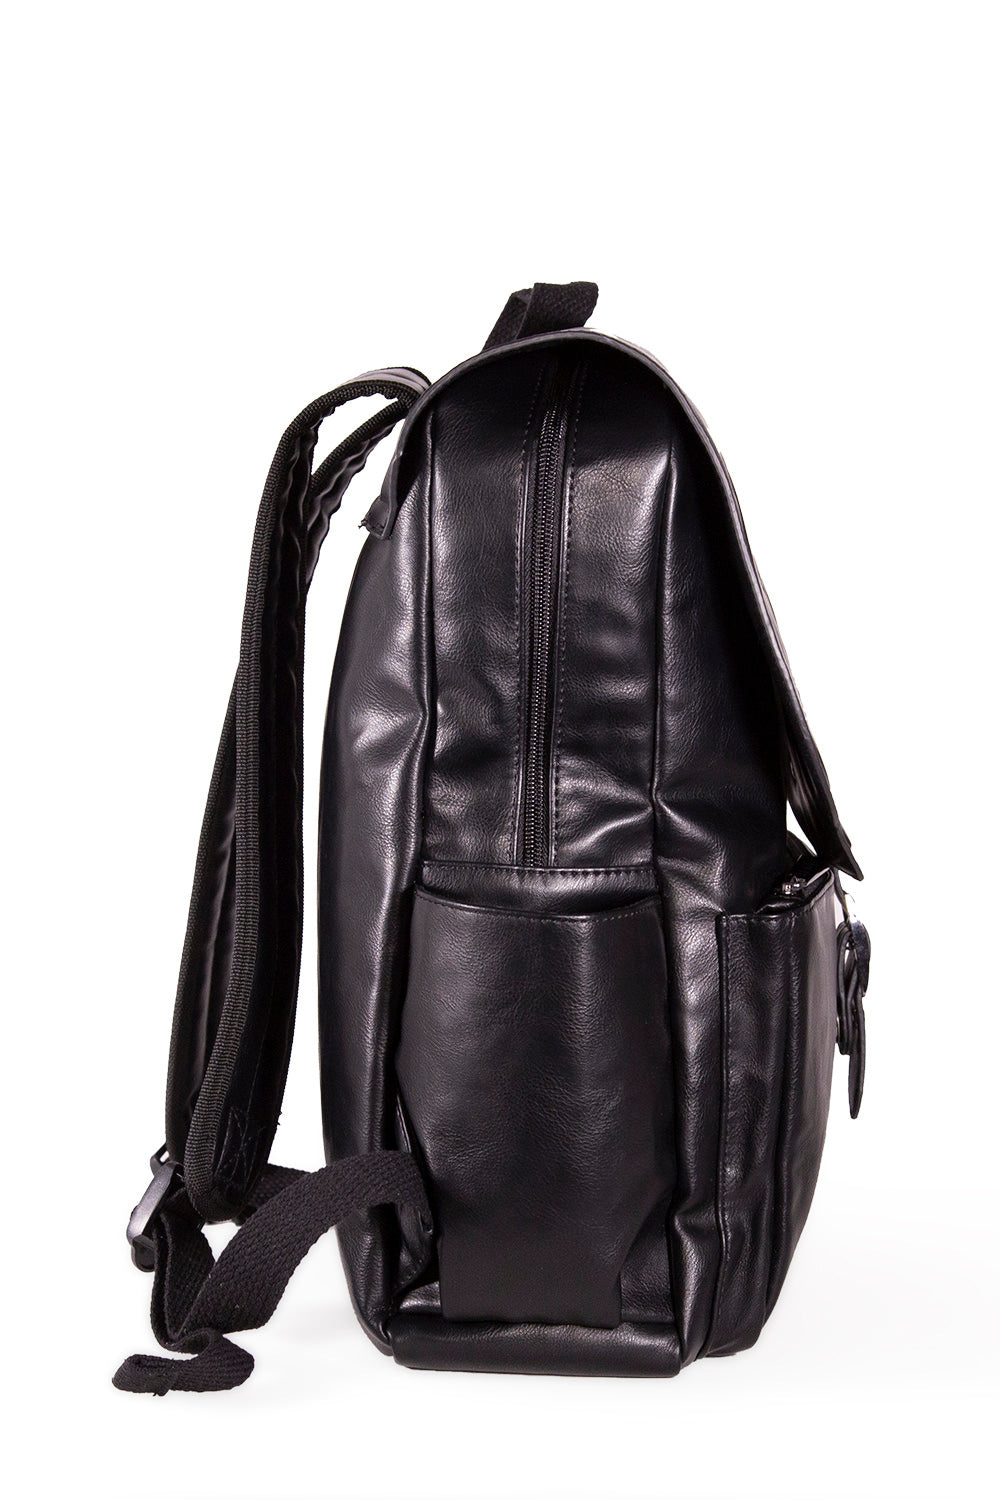 Black backpack with two embossed skulls and buckle 